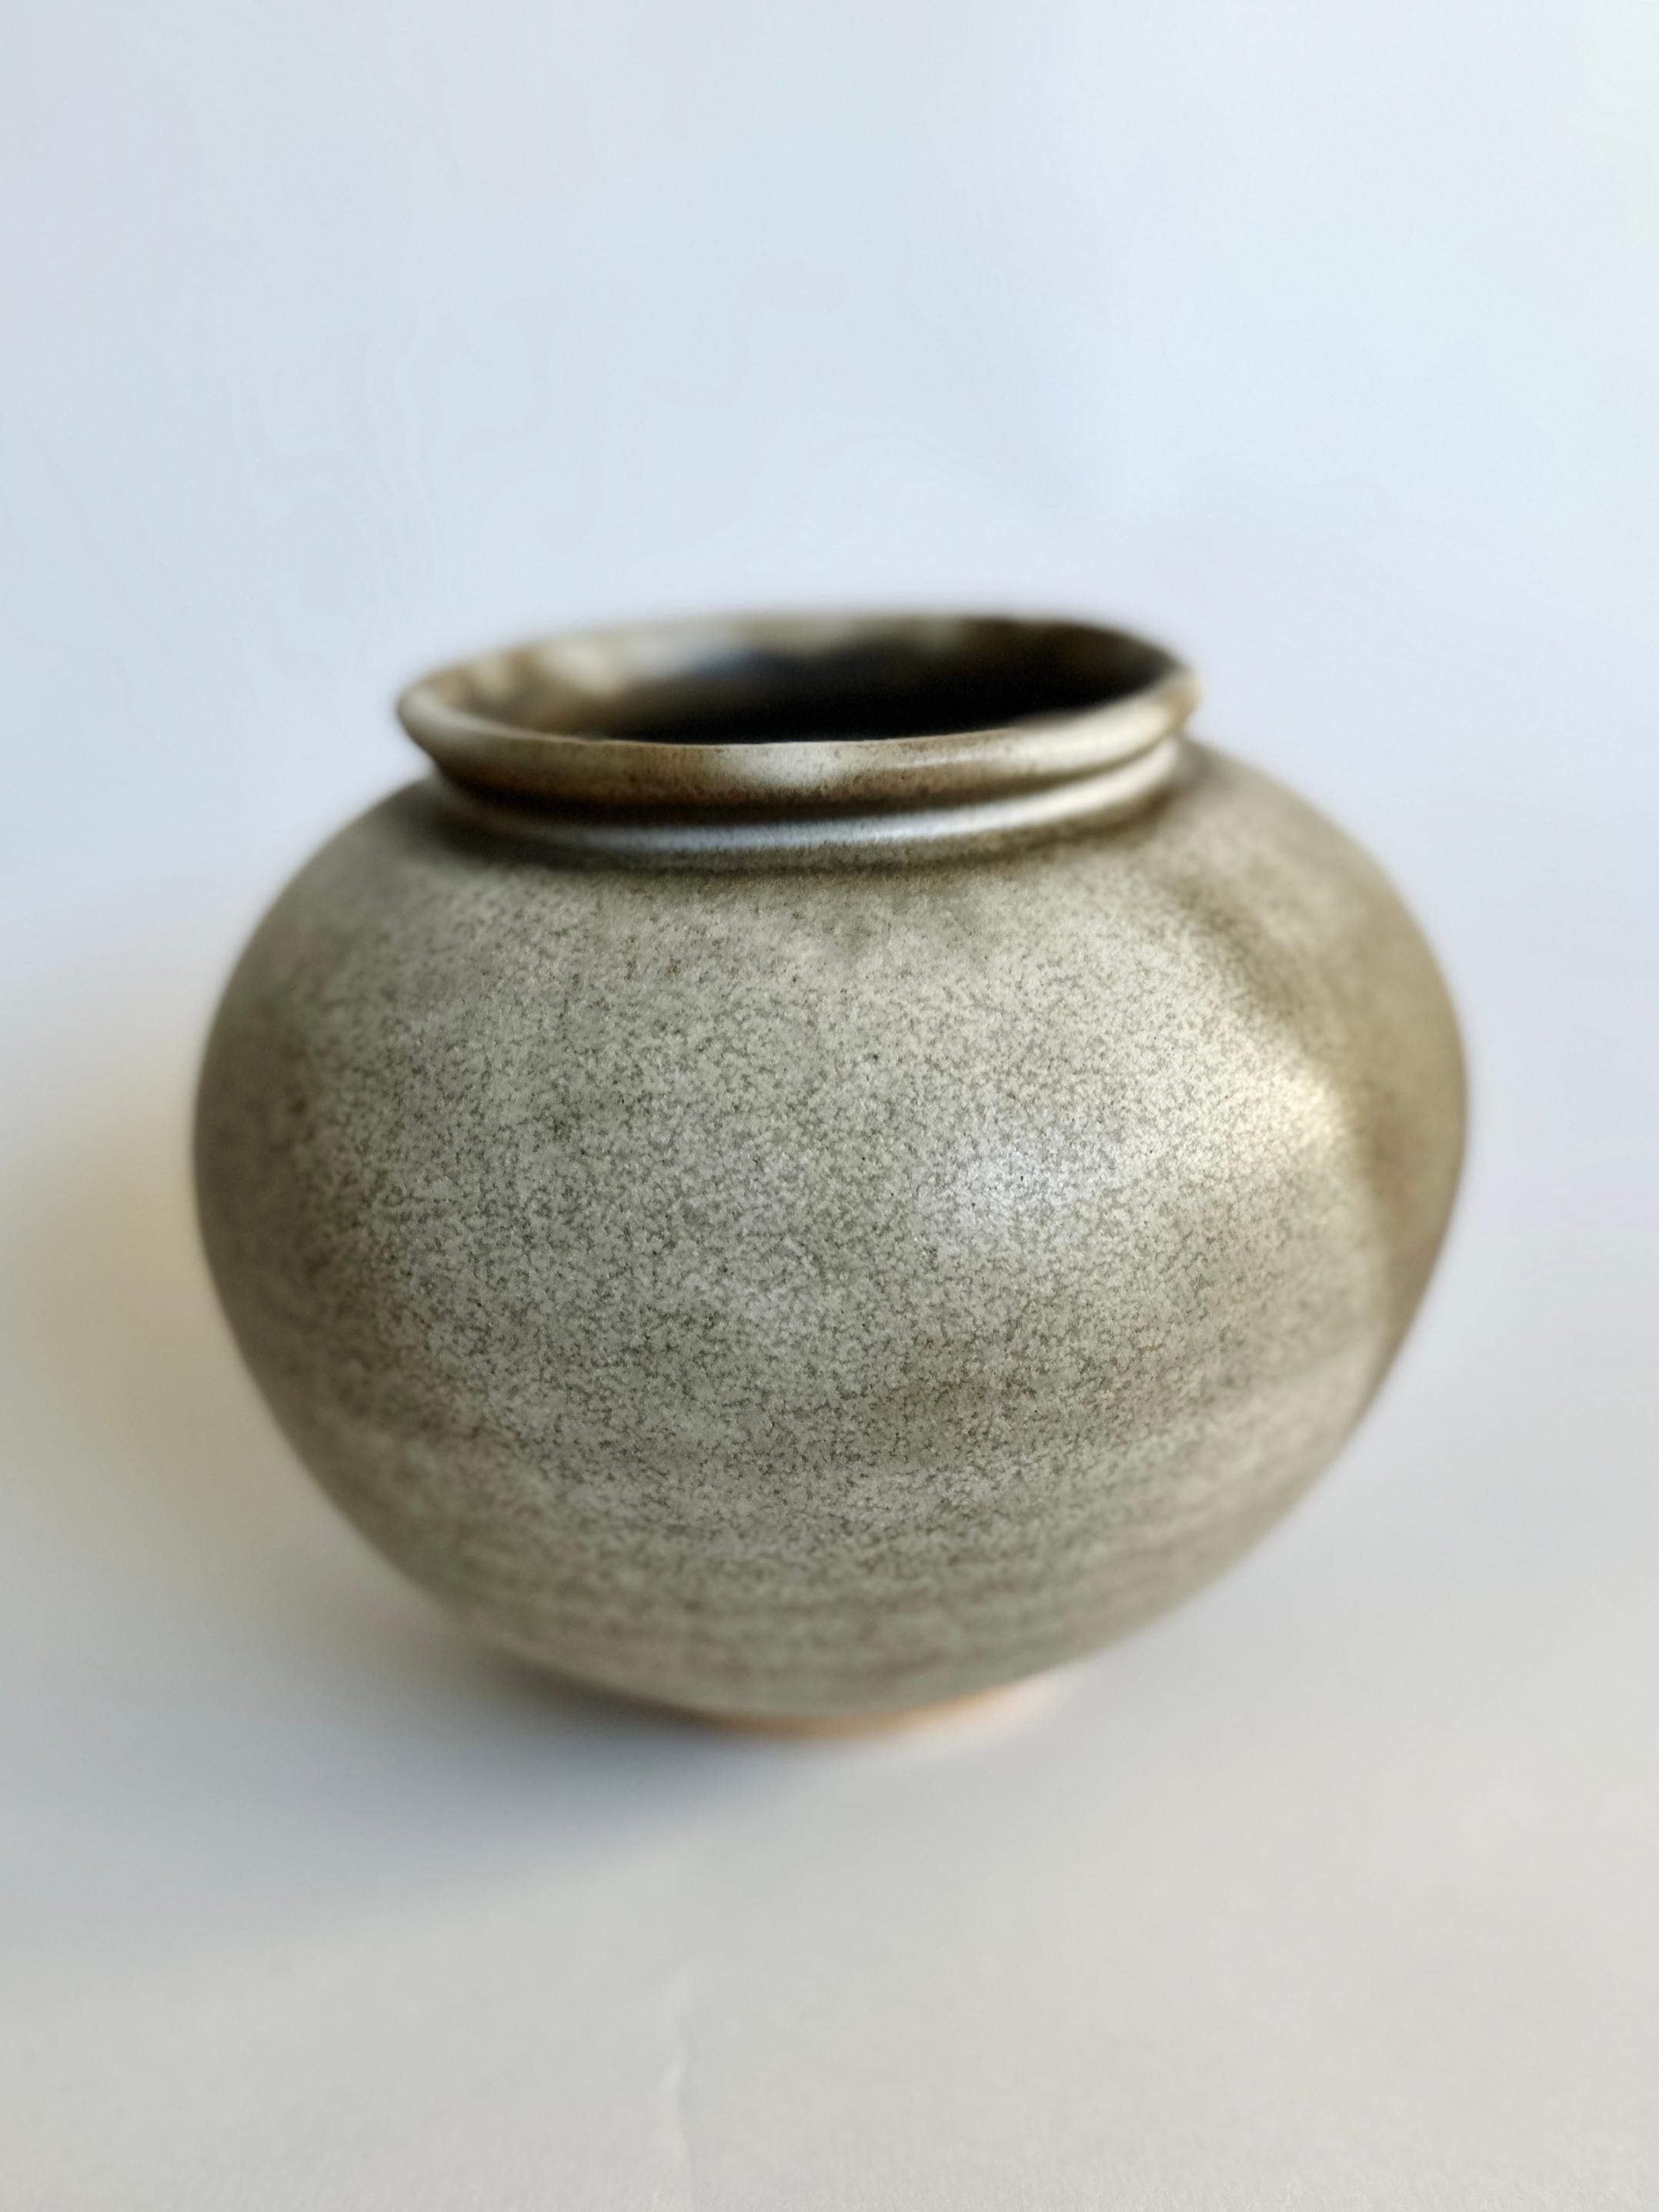 Wheel-thrown vase in beautiful light and dark earthy hues. Made from light stoneware, this piece serves as a testament to the timeless beauty of heirloom pottery, bringing an organic serenity to your dearest spaces. If filled with water, it is